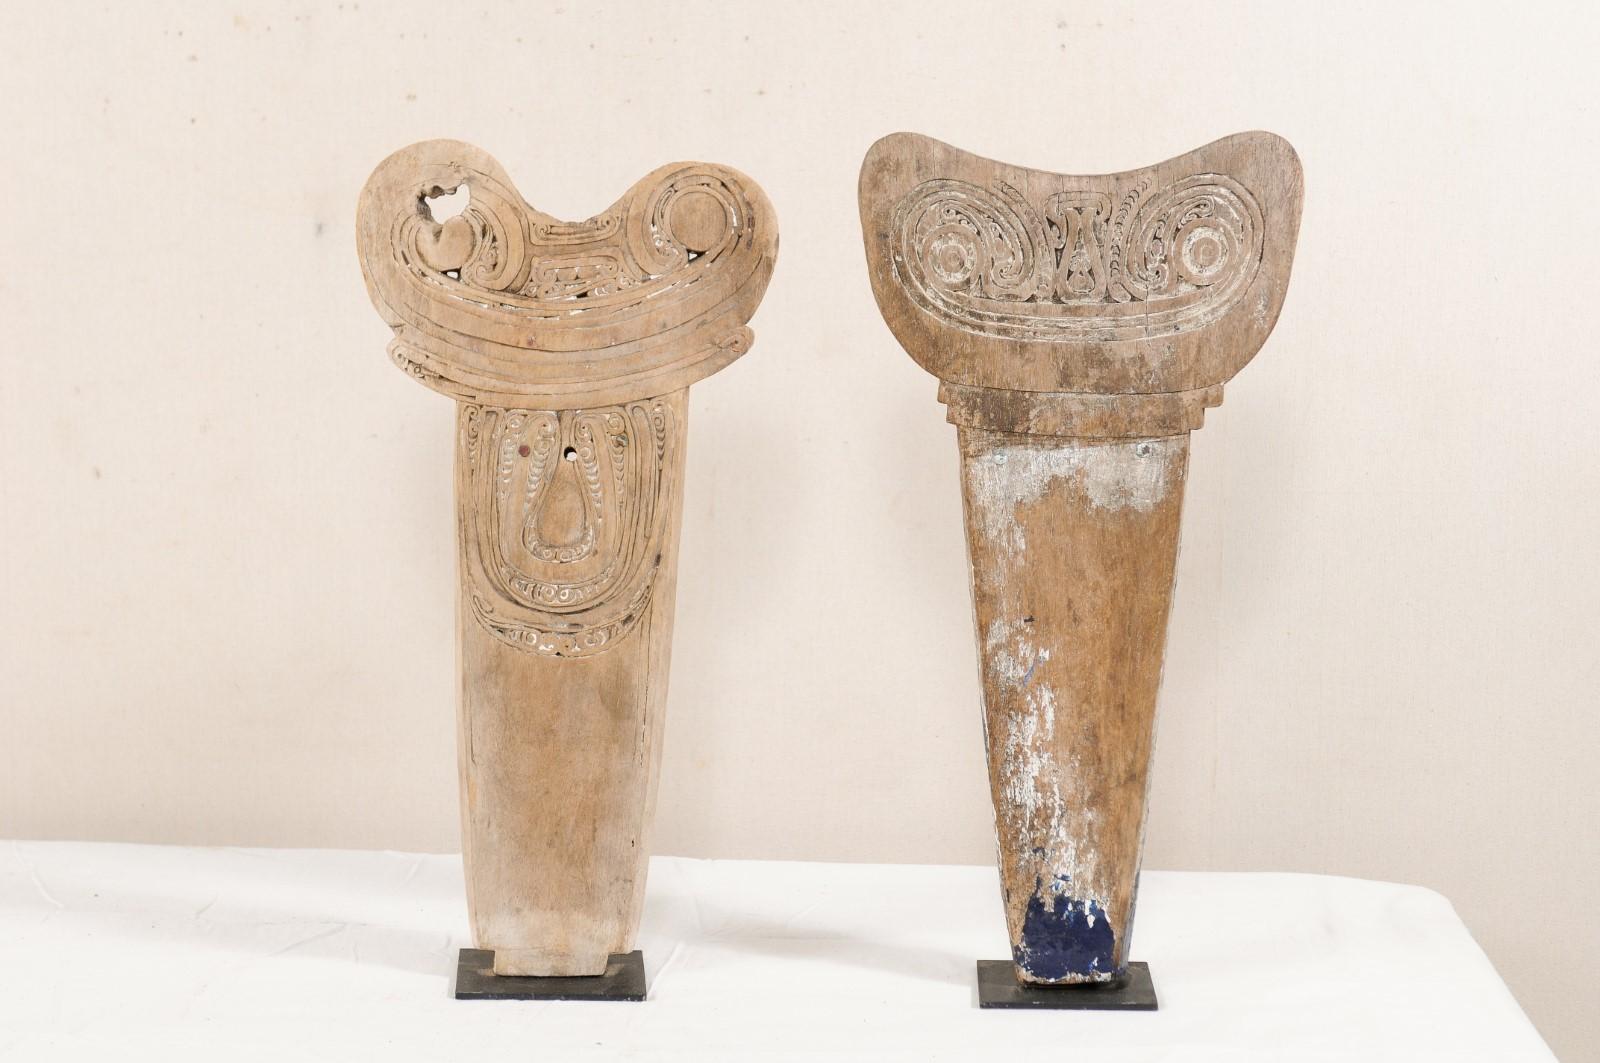 A pair of decoratively carved wood splash boards from the southeastern region of Papua, New Guinea, presented on custom stands. This pair of vintage tribal boards have been carved from a single piece of wood, and were typically used in the front of